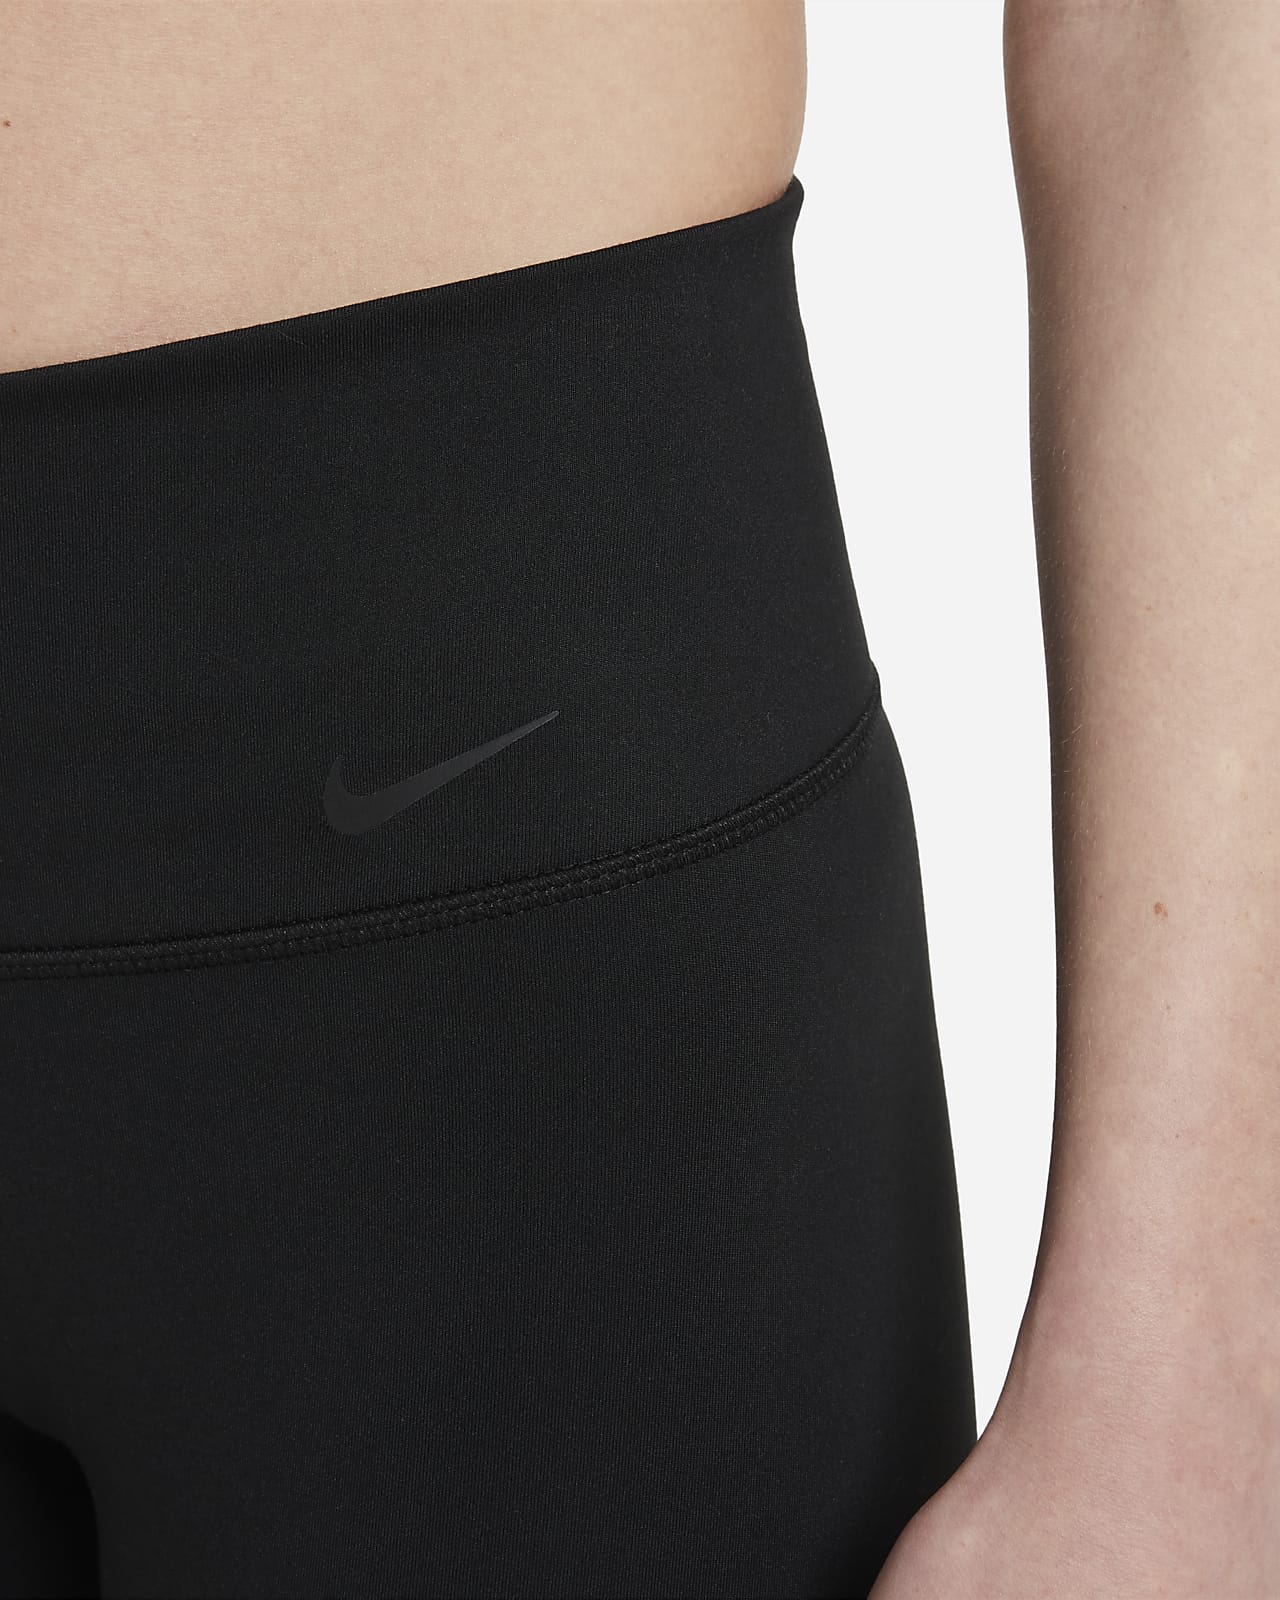 Women's Nike Power Training Just Do It Graphic Tights